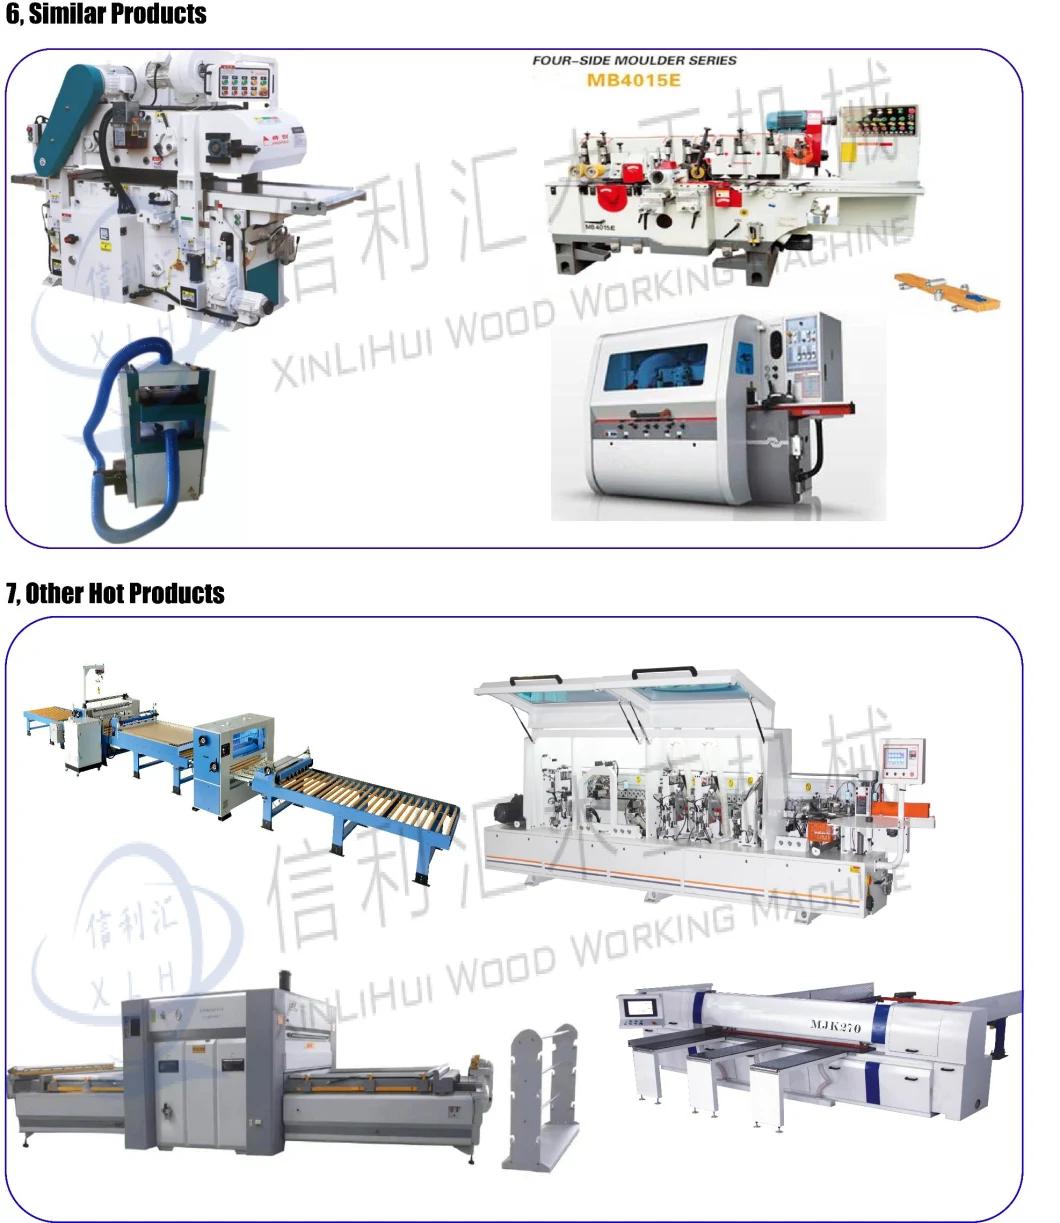 Woodworking Four Side Moulder Planer with Sheild 230mm/ Multi - Axis Cross - Saw Cutting Machine/ Woodworking Machinery Moulder Tools and Equipment